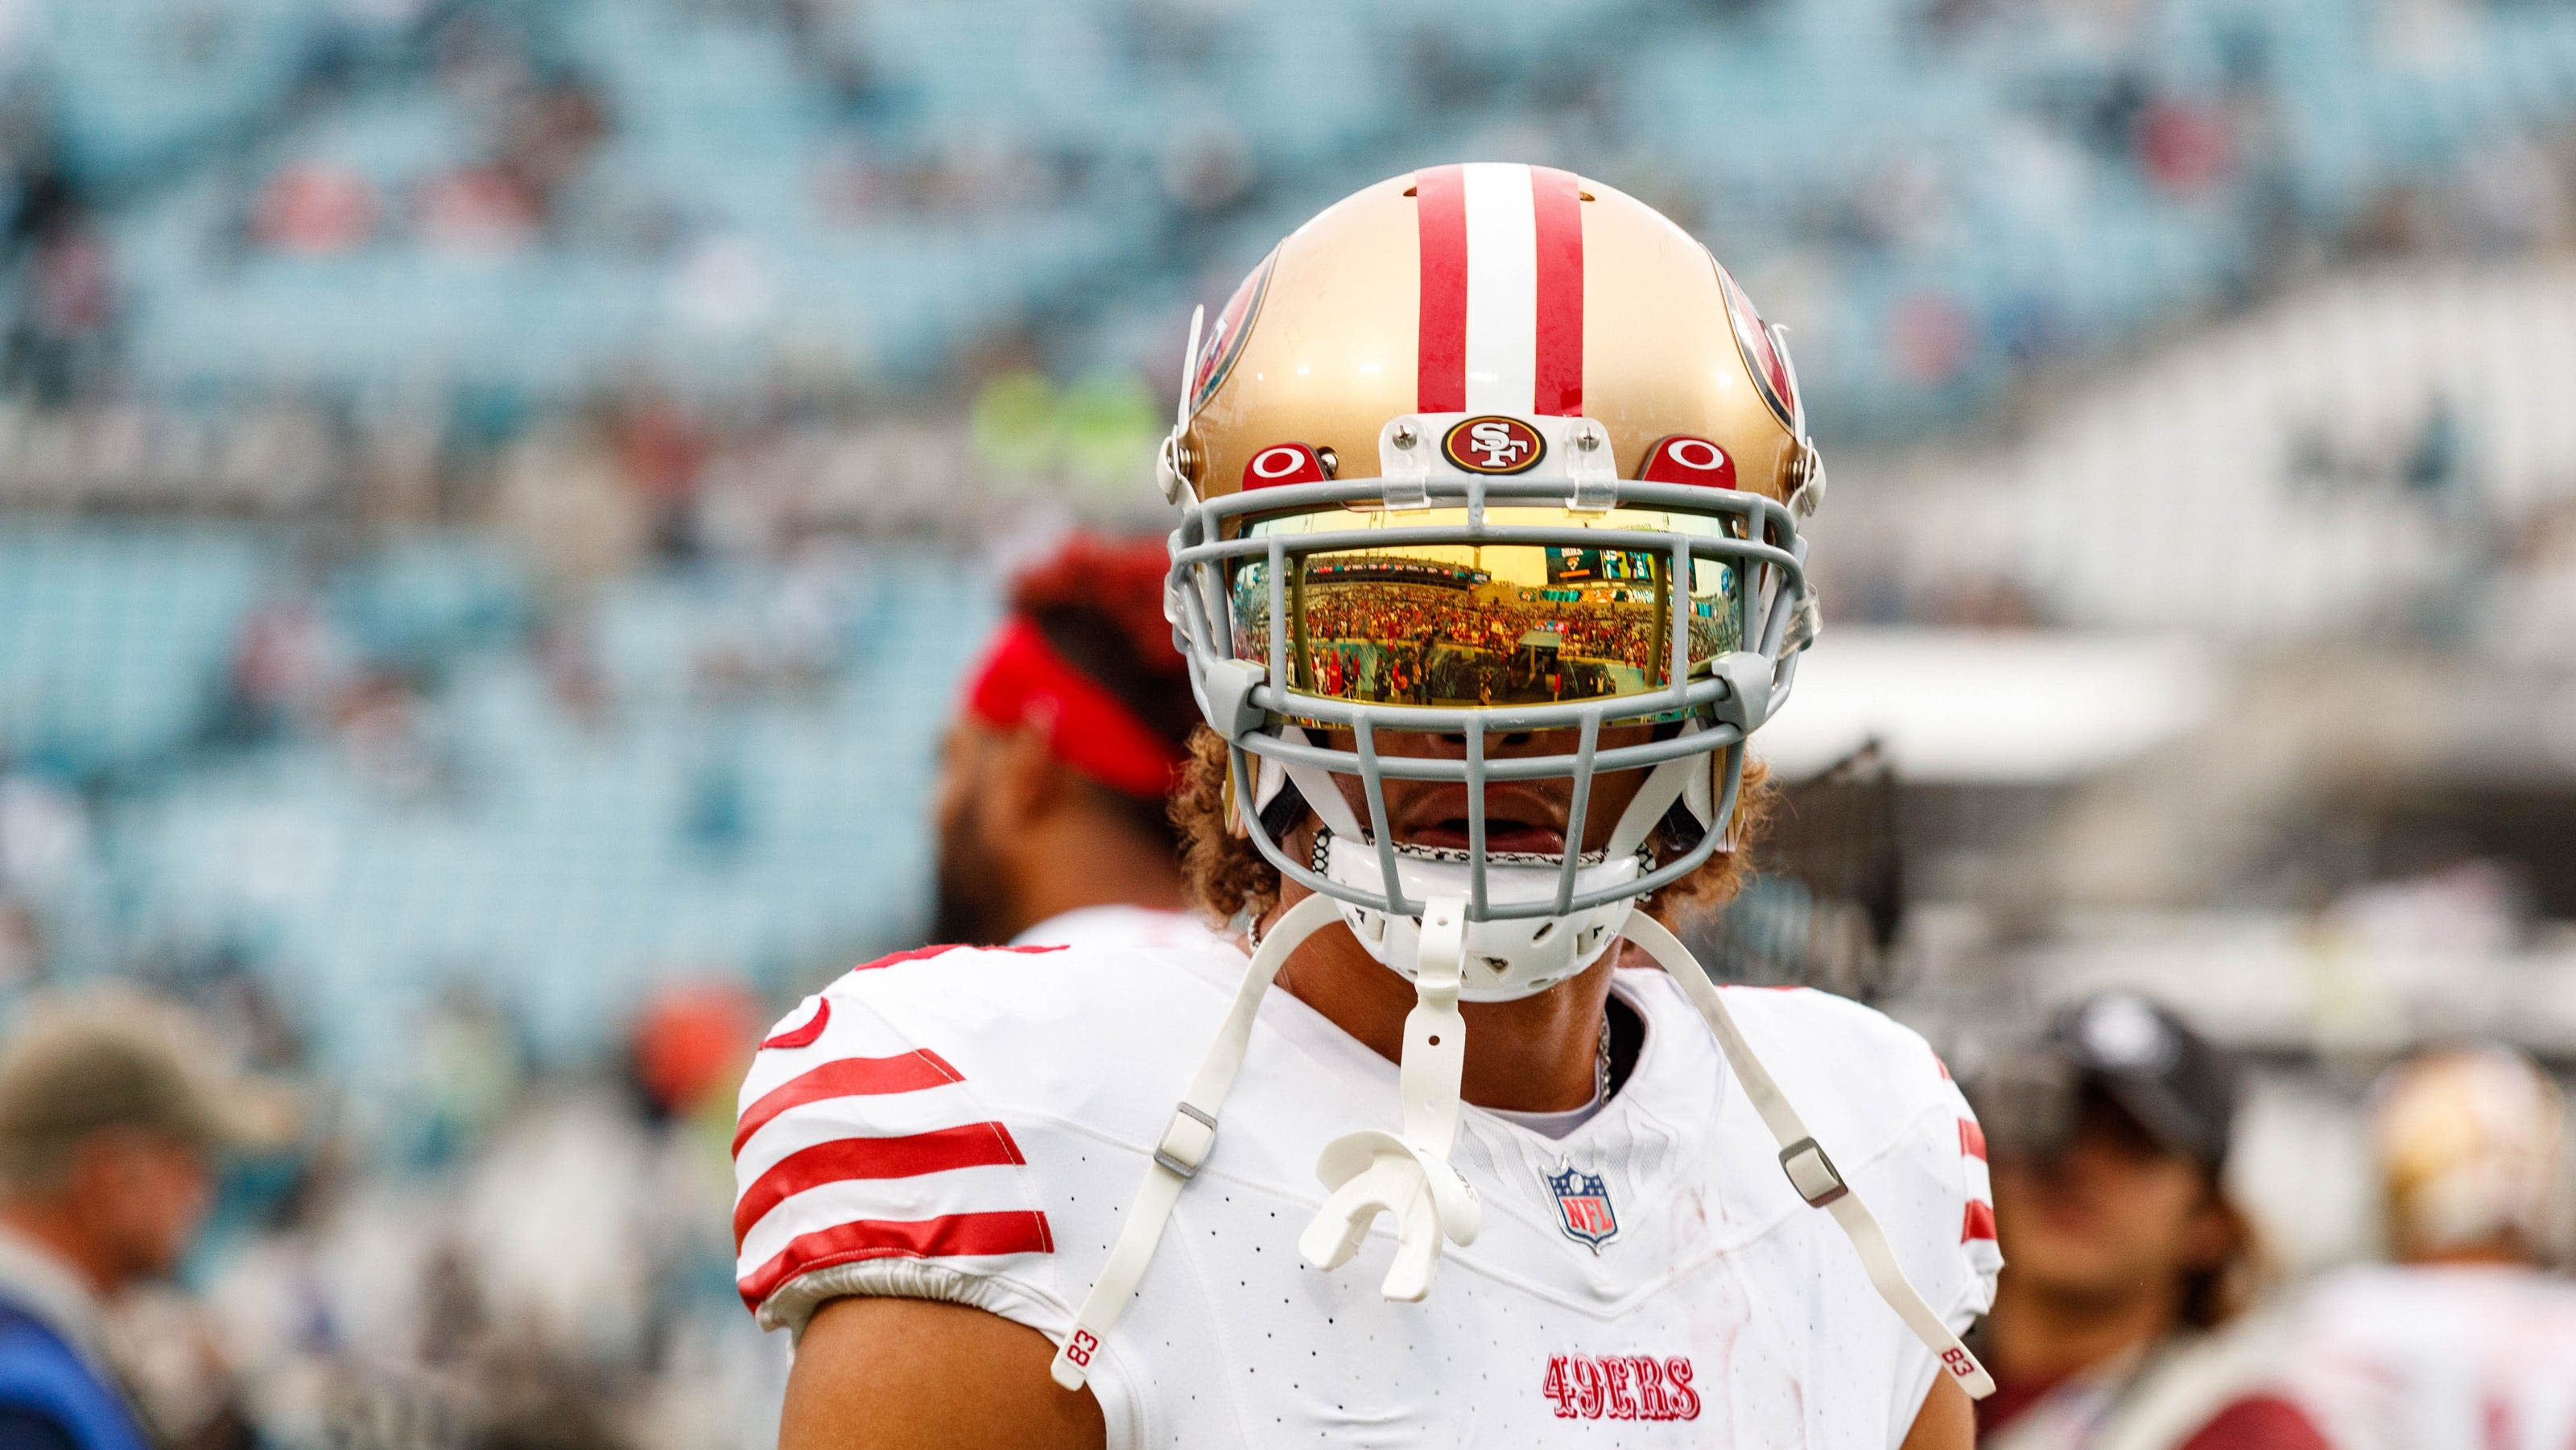 Willie Snead, Tua Tagovailoa clear air after receiver's tweet during Dolphins playoff game